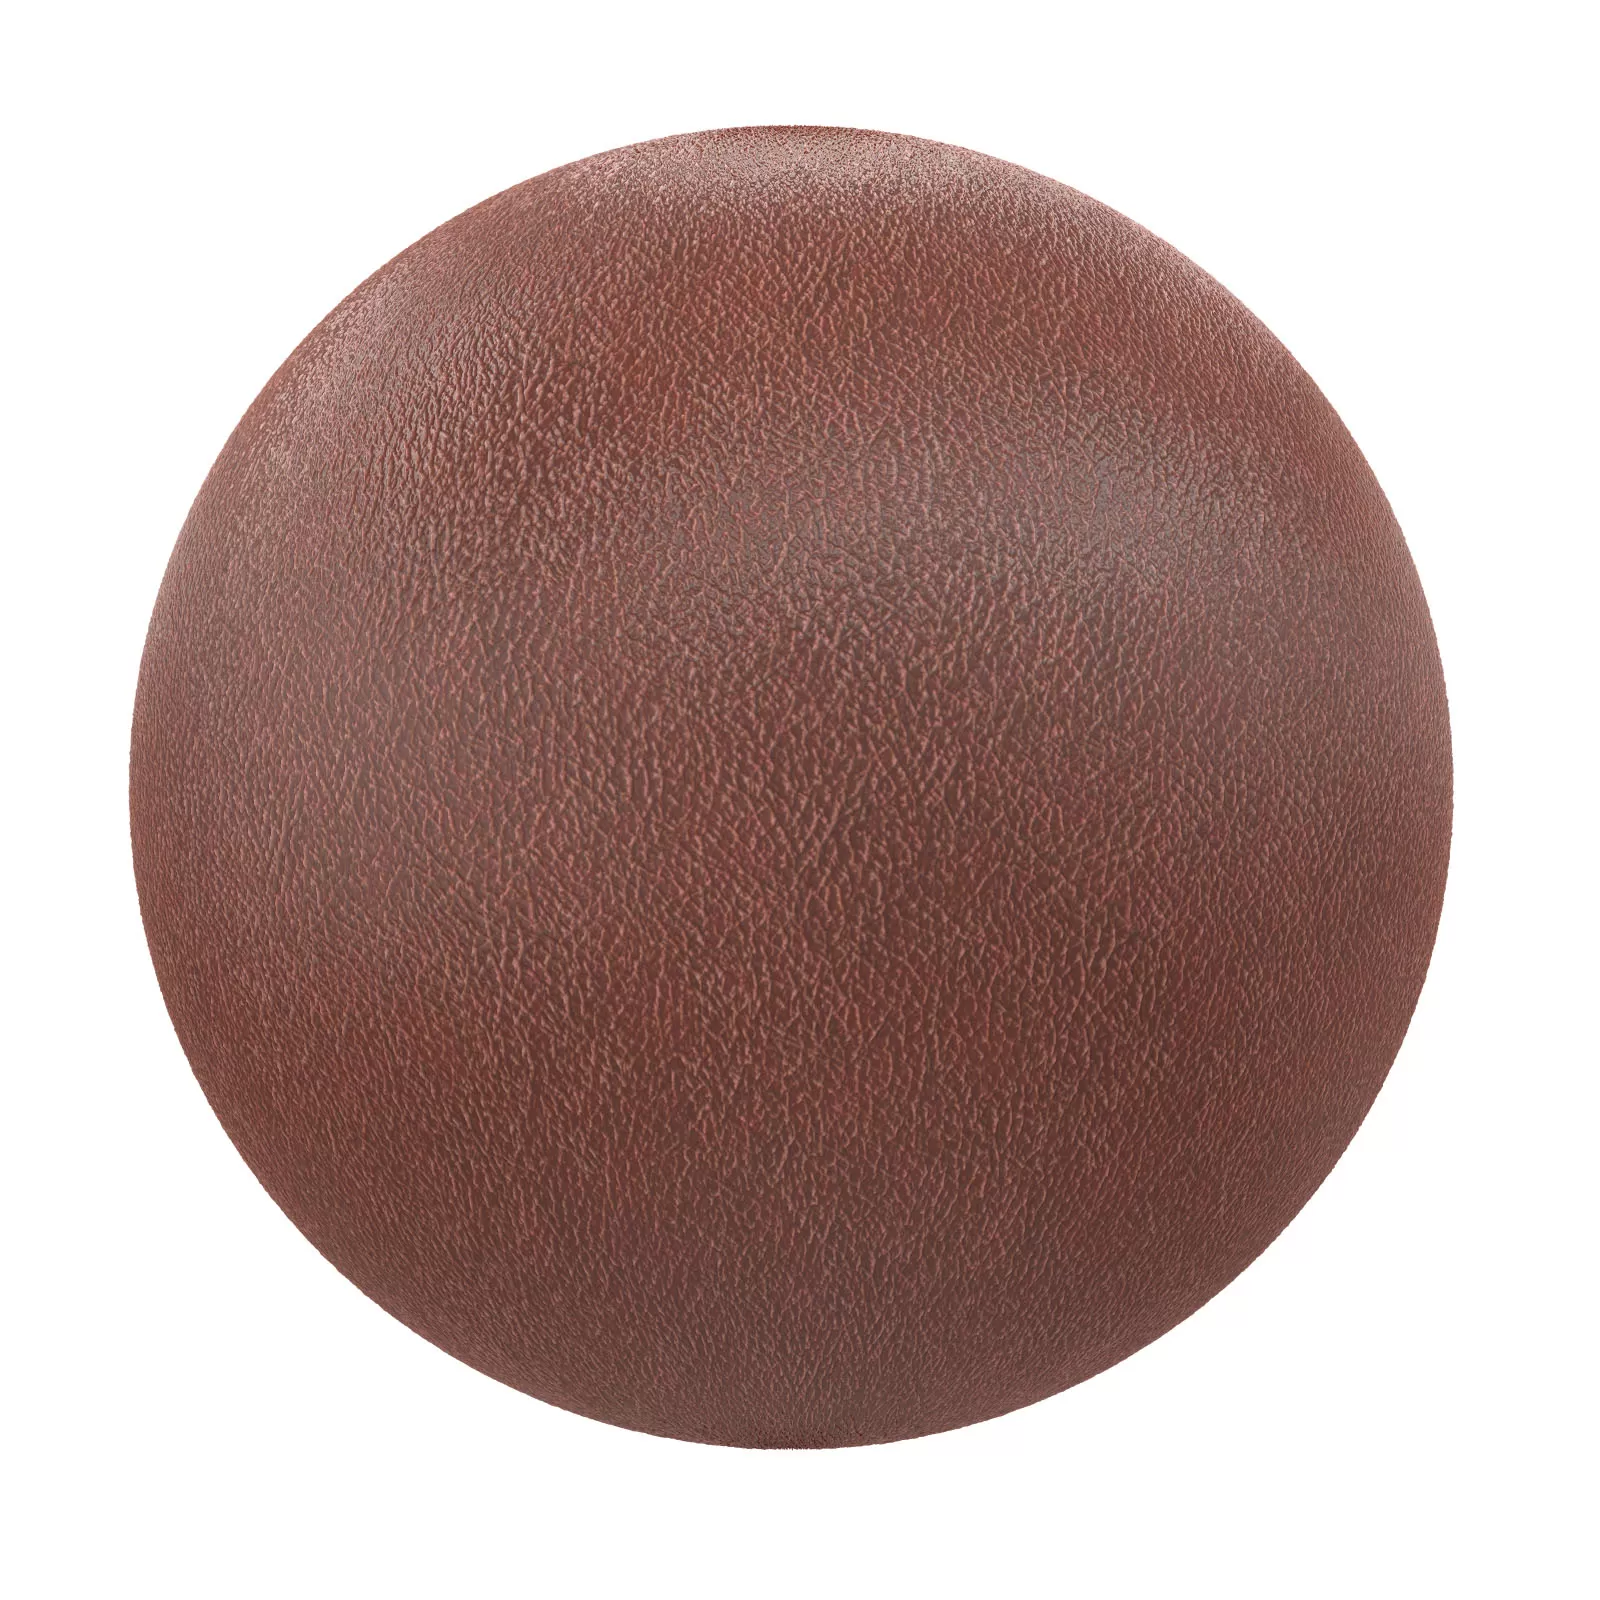 PBR CGAXIS TEXTURES – LEATHER – Brown Leather 26